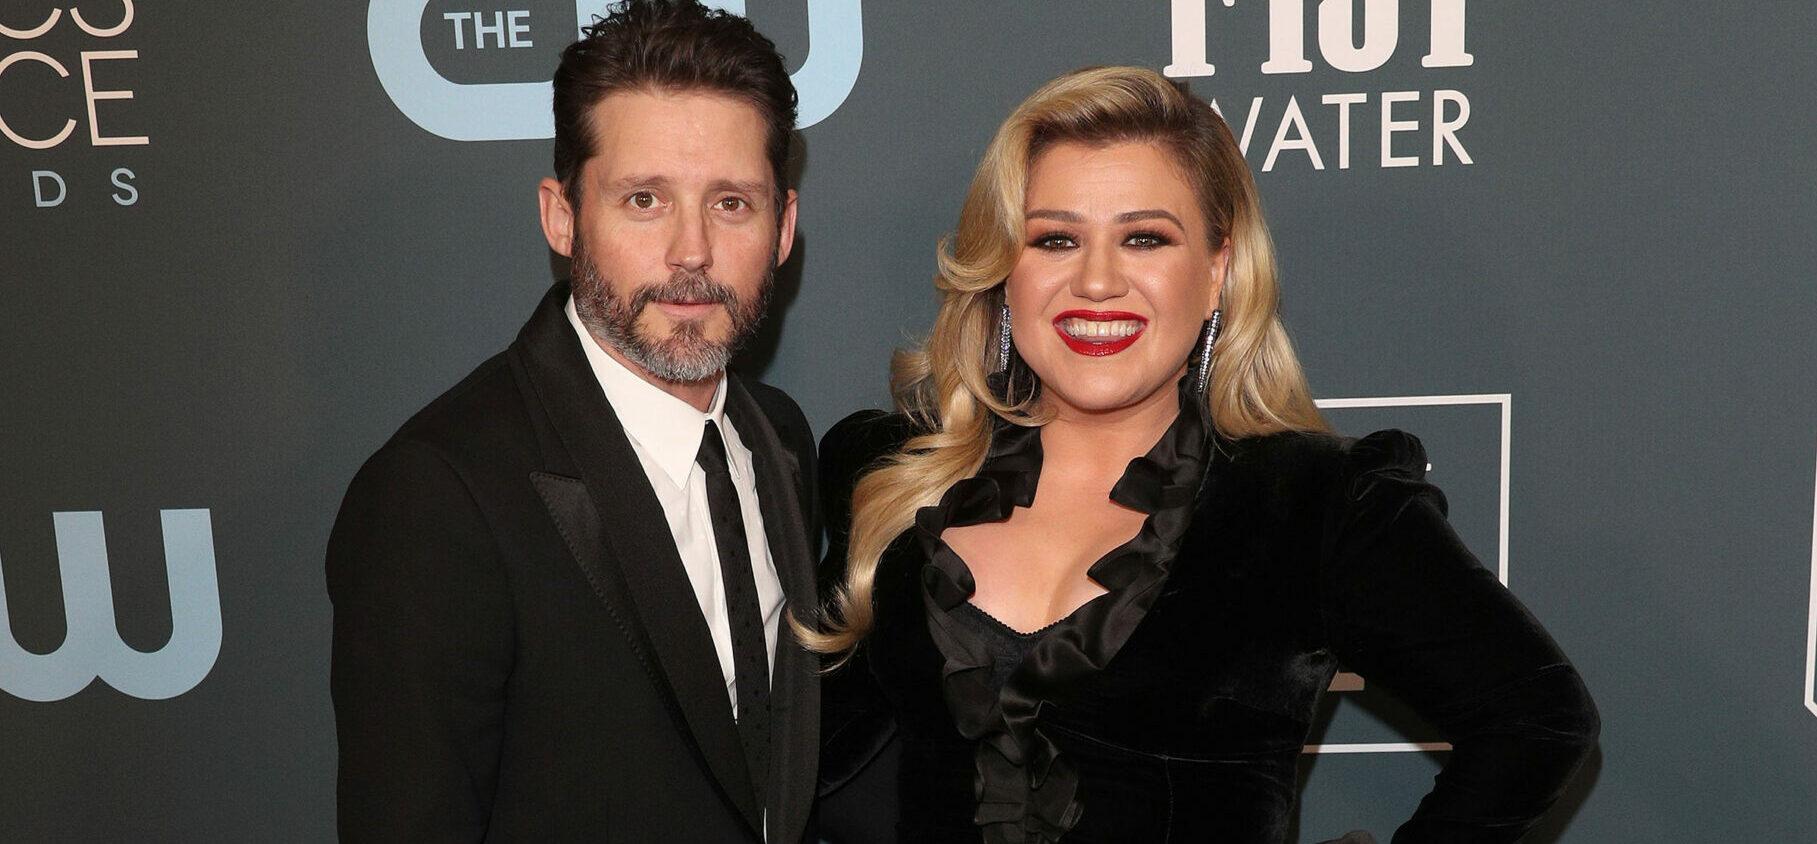 Kelly Clarkson Finally Settles Divorce, Agrees To Vaccinate Kids From COVID-19